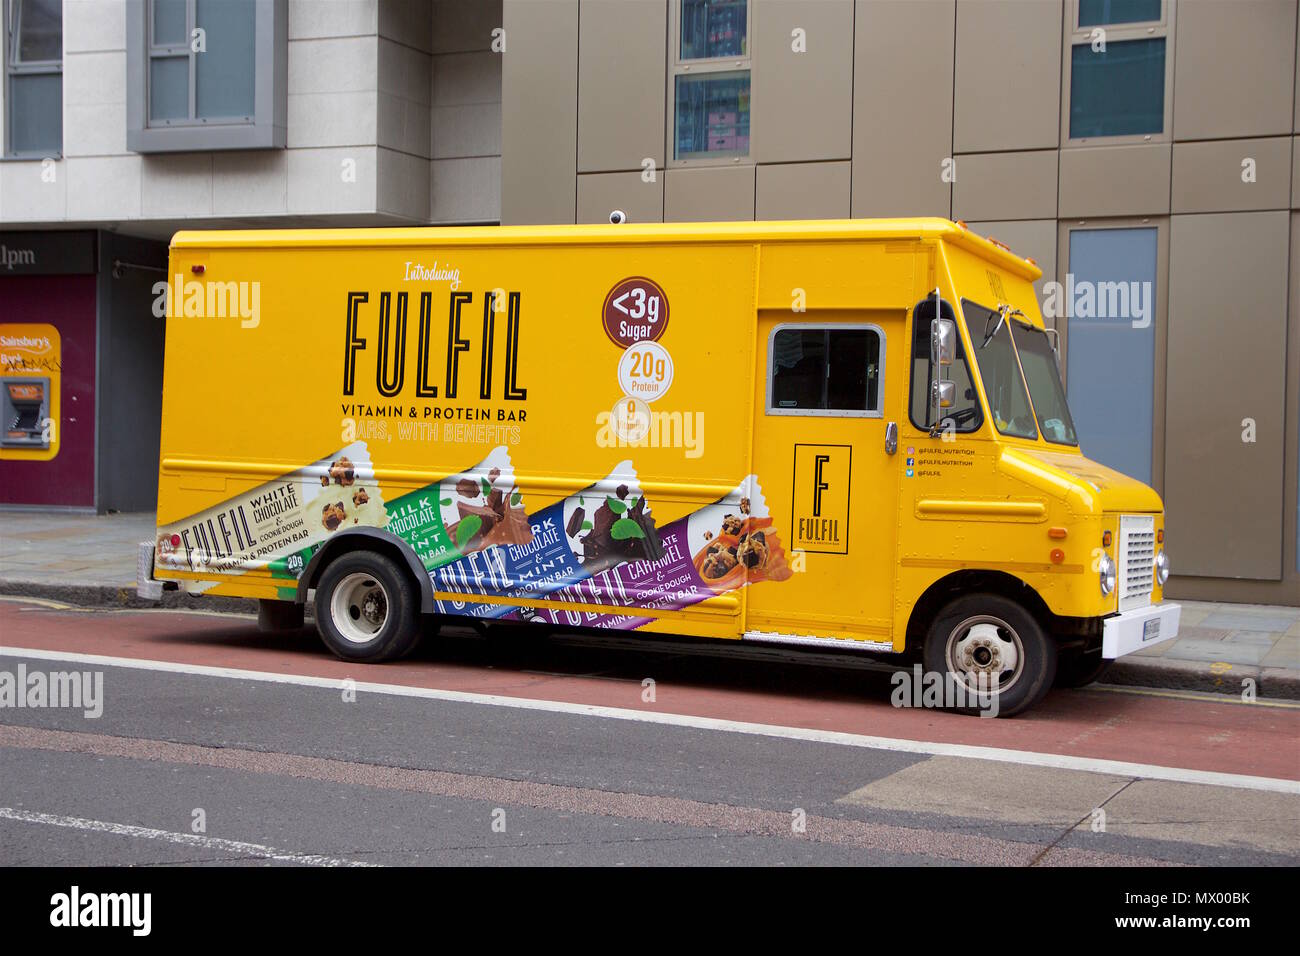 A parked yellow van that has a sponsored advert for Fulfil Vitamin Protein Bars on it Stock Photo